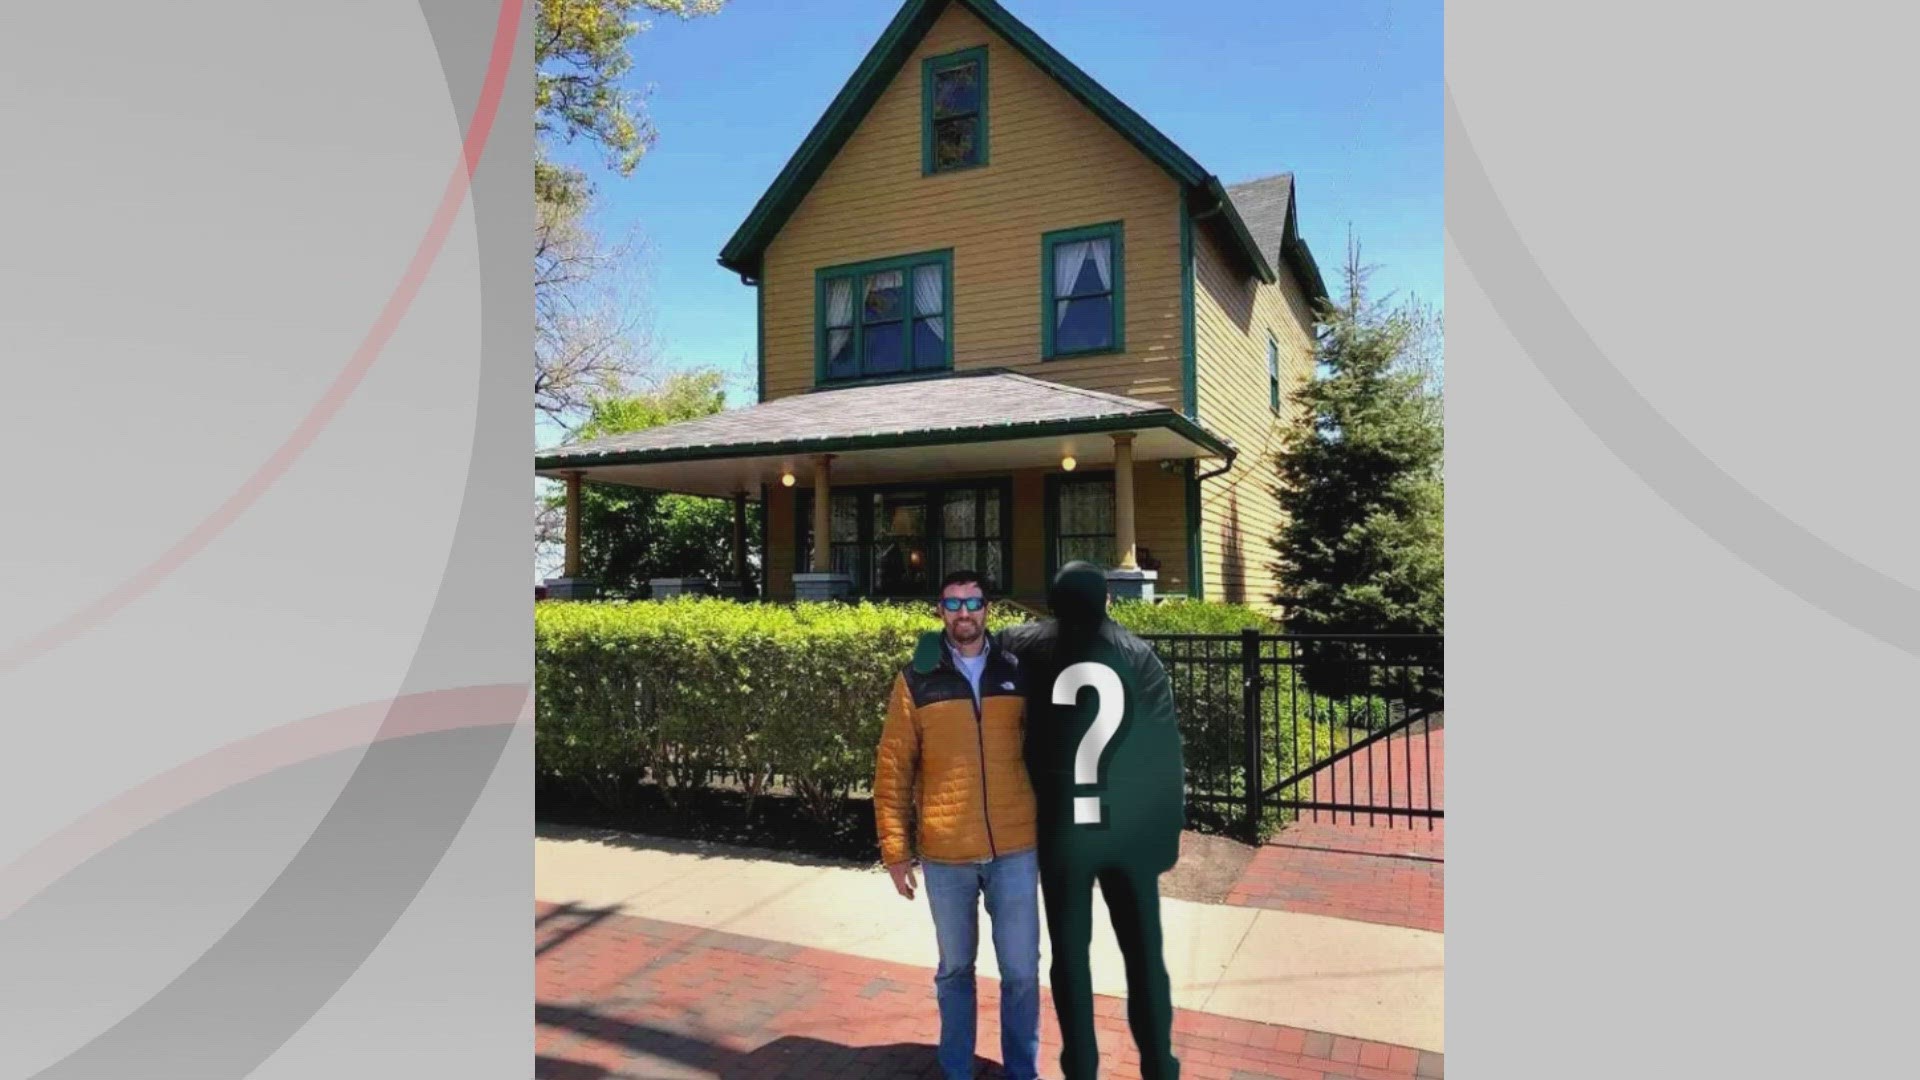 Rumors have been swirling about who purchased the iconic Cleveland house used in 'A Christmas Story.' But Ralphie actor Peter Billingsley says it's not him.